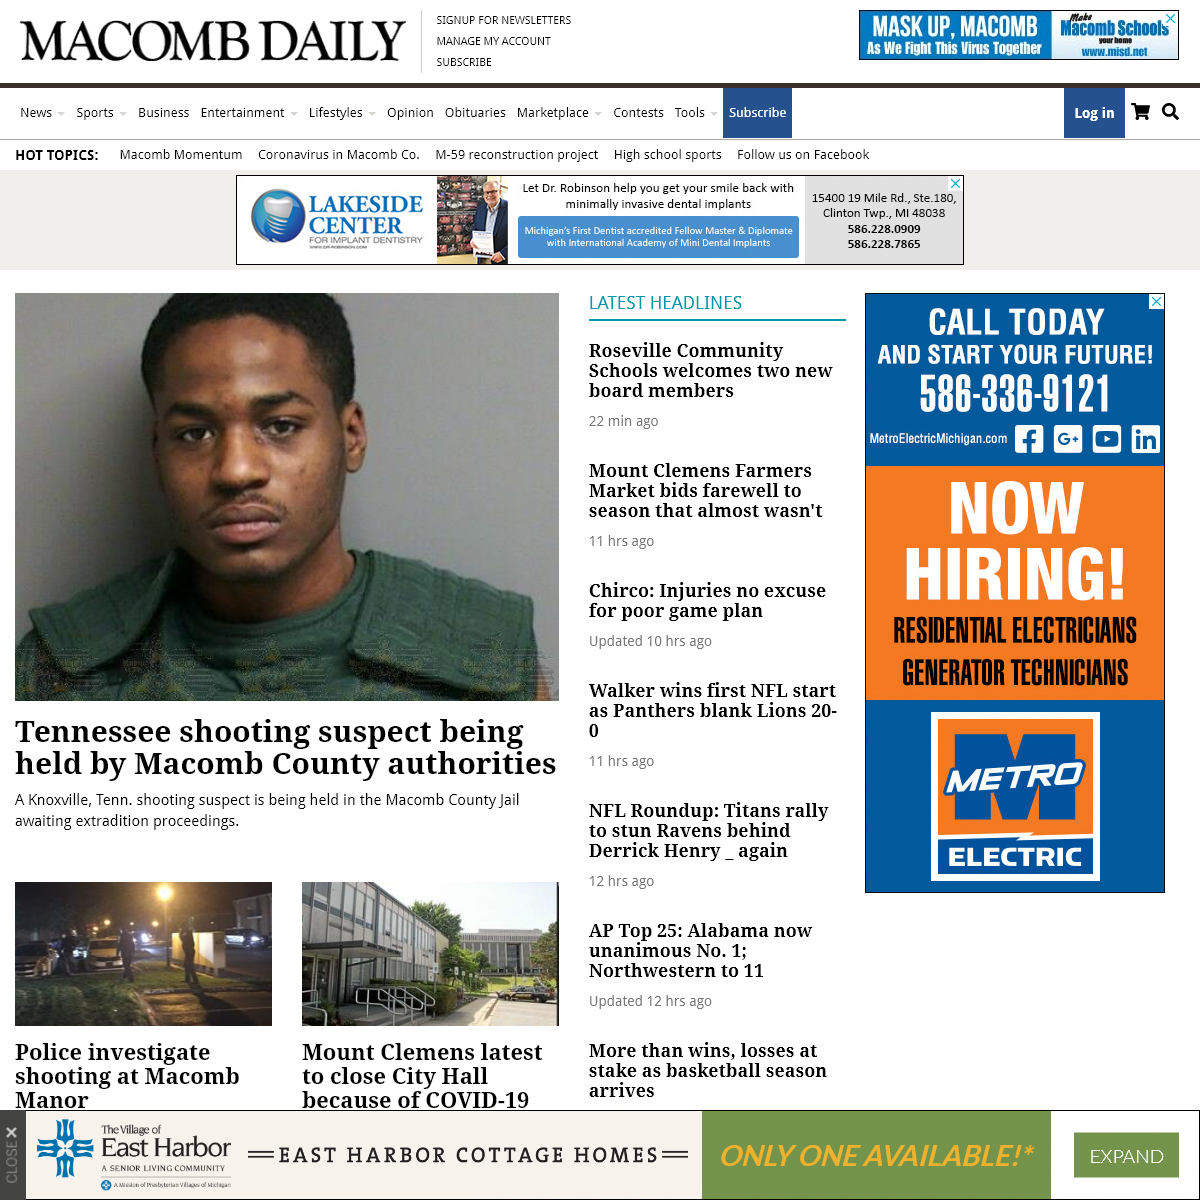 macombdaily.com - Macomb County, MI News, Breaking News, Sports, Weather & Things to Do